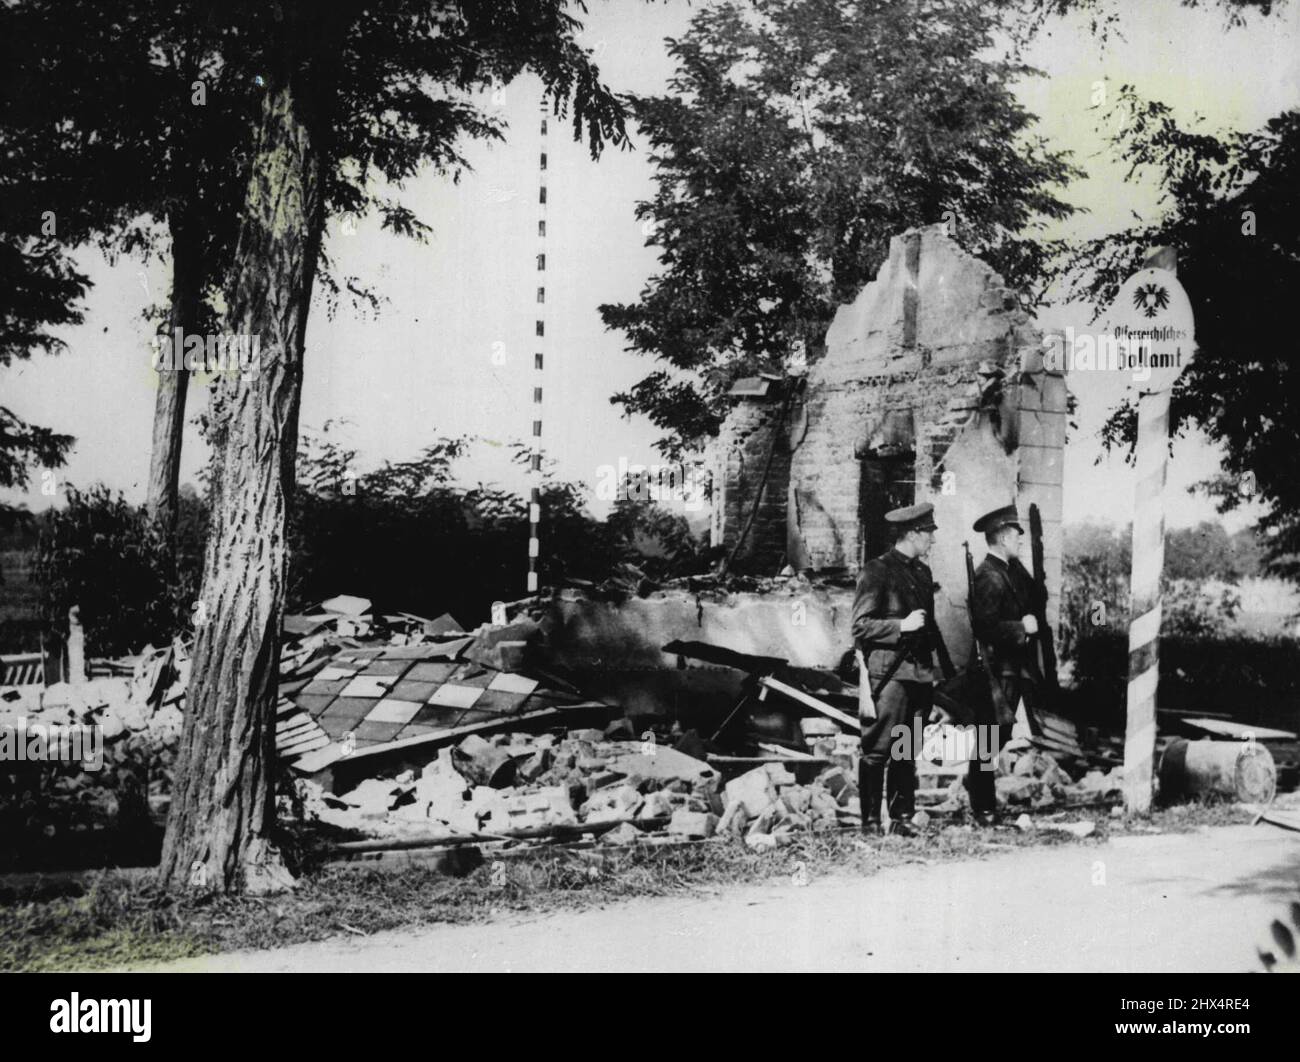 Czechs Blow Up Austrian Customs House. First picture received since the crisis, from the Austro-Czech frontier, showing a wrecked Austrian customs house at Neu-Prerau, near Laa, after it had been blown up by Czechoslovakian rioters. September 25, 1938. (Photo by Keystone). Stock Photo